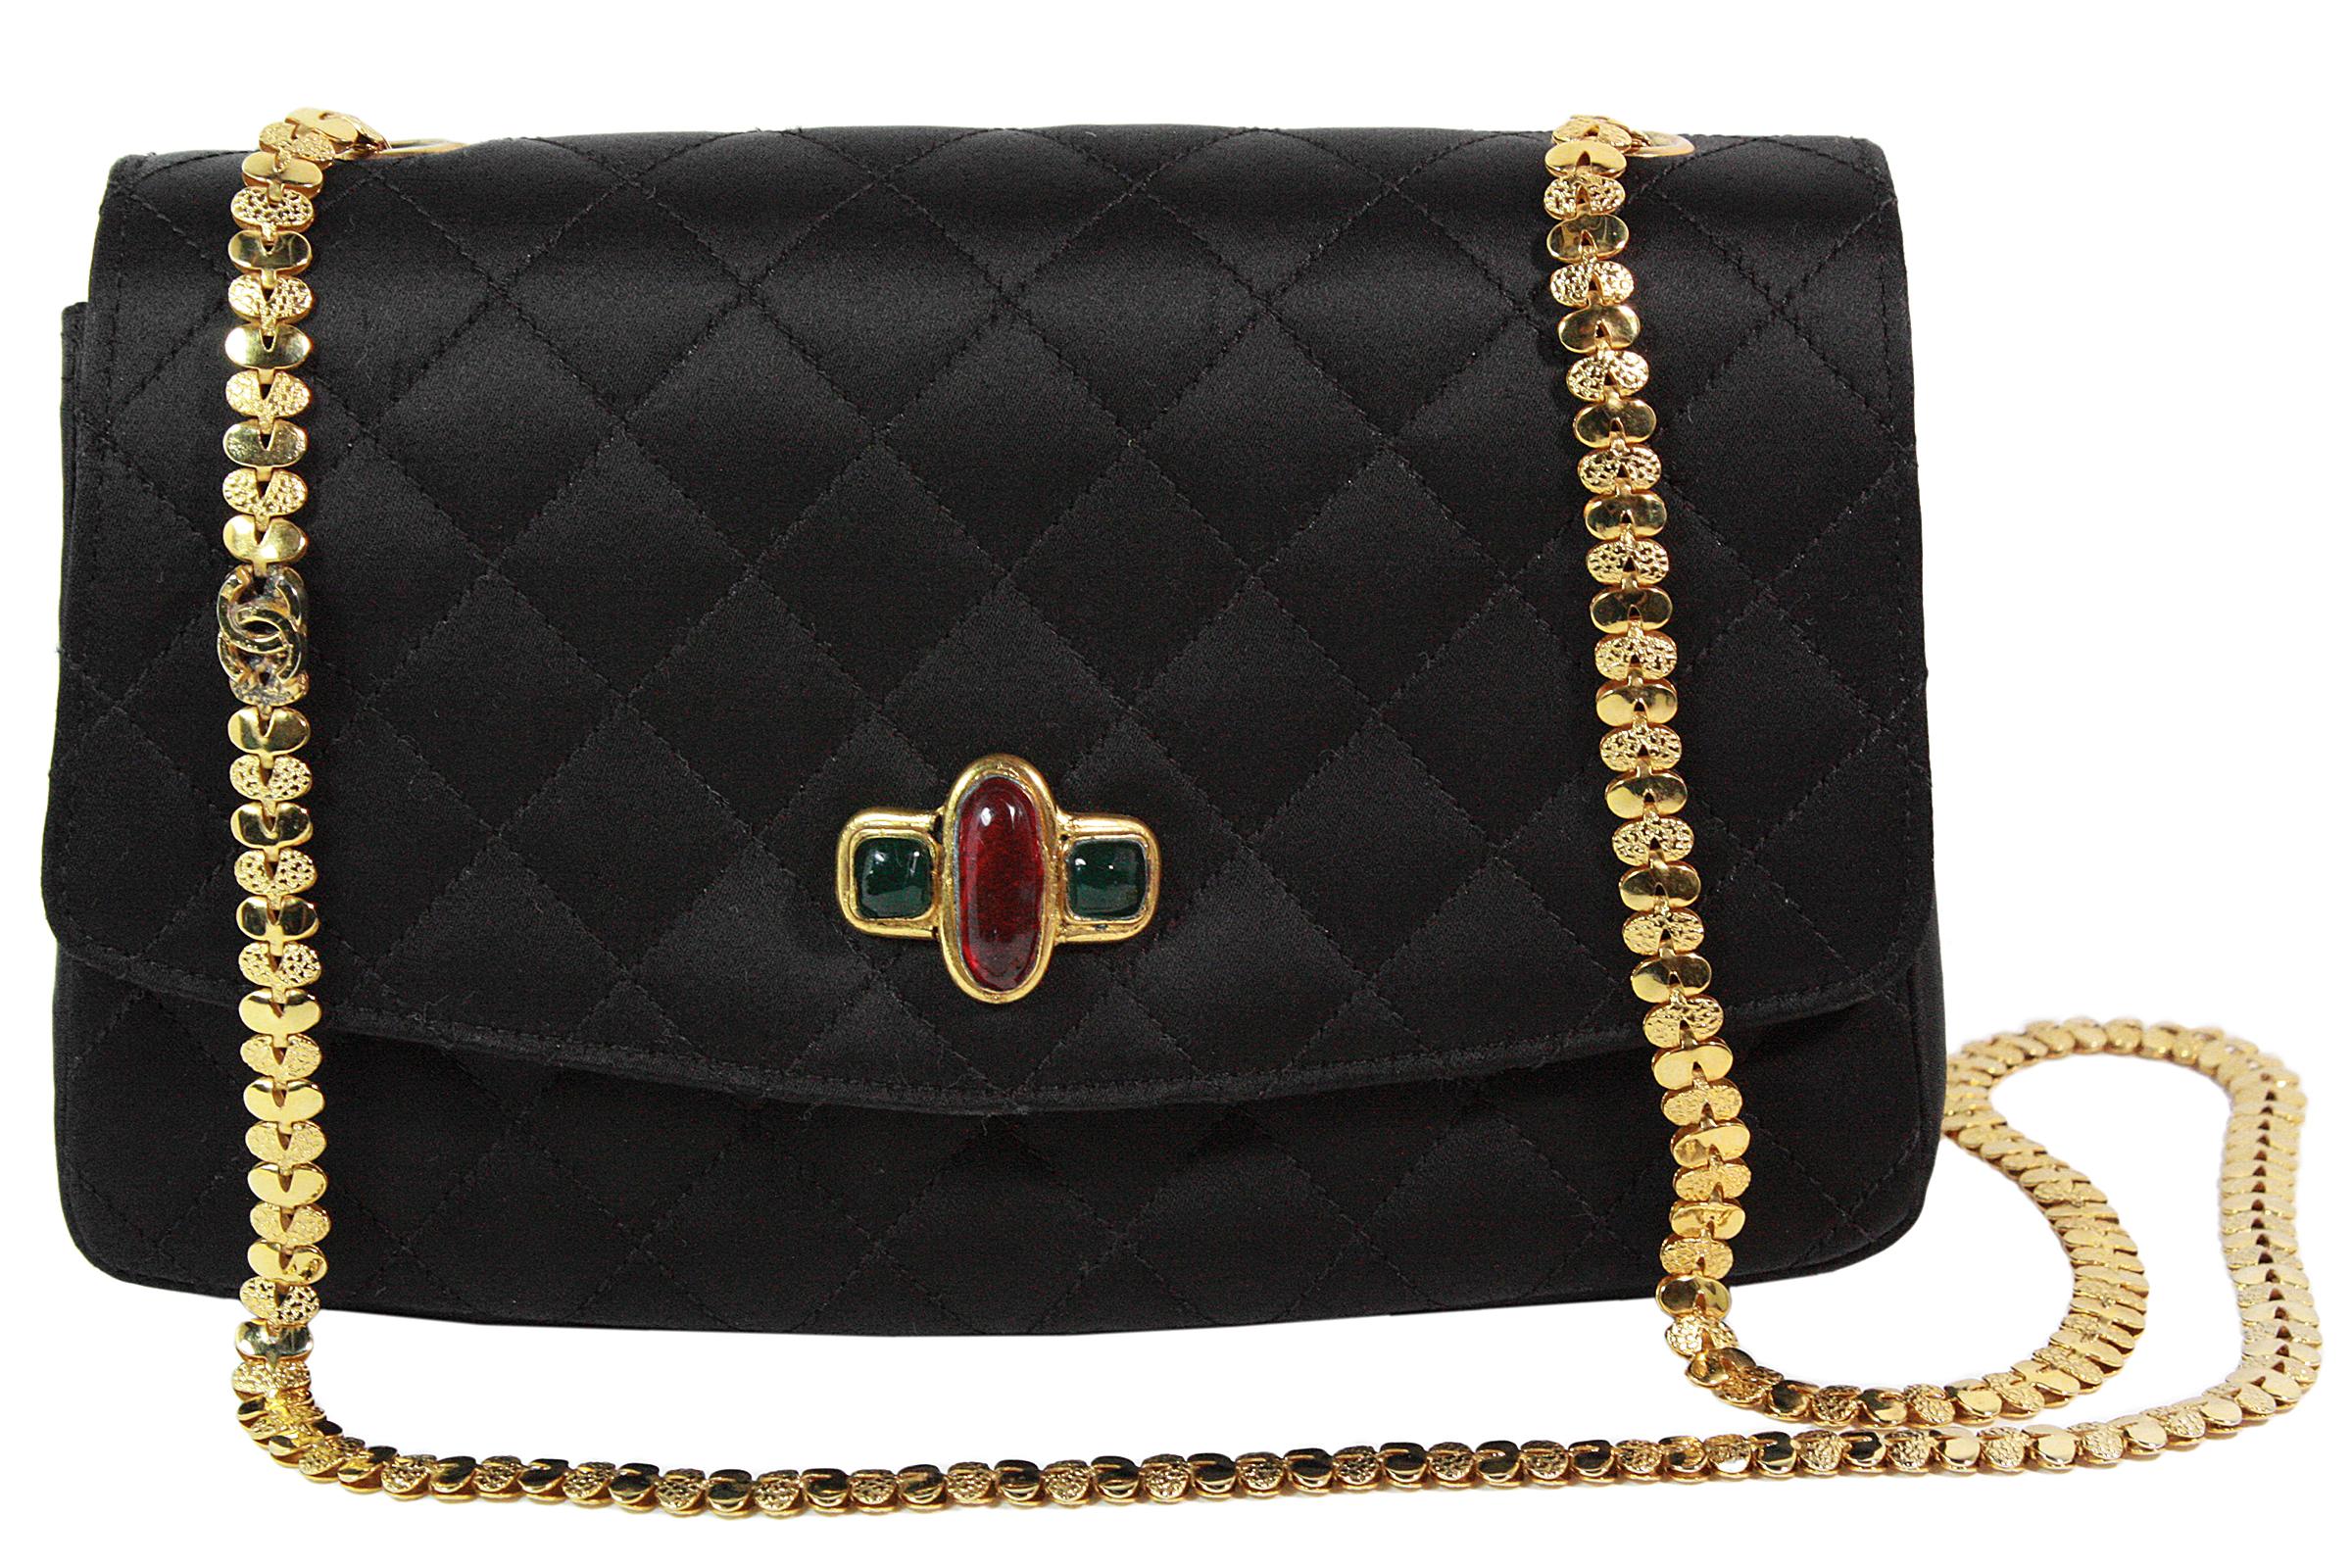 Chanel crossbody bag
Made in France
Black quilted satin  
Attached red and green gripoix (poured glass) 
Inside pocket 
Gold decorative CC chain strap
Chain strap length: 34 inches 
Black satin lining 
Comes with dustbag
Serial number: 116669 (no